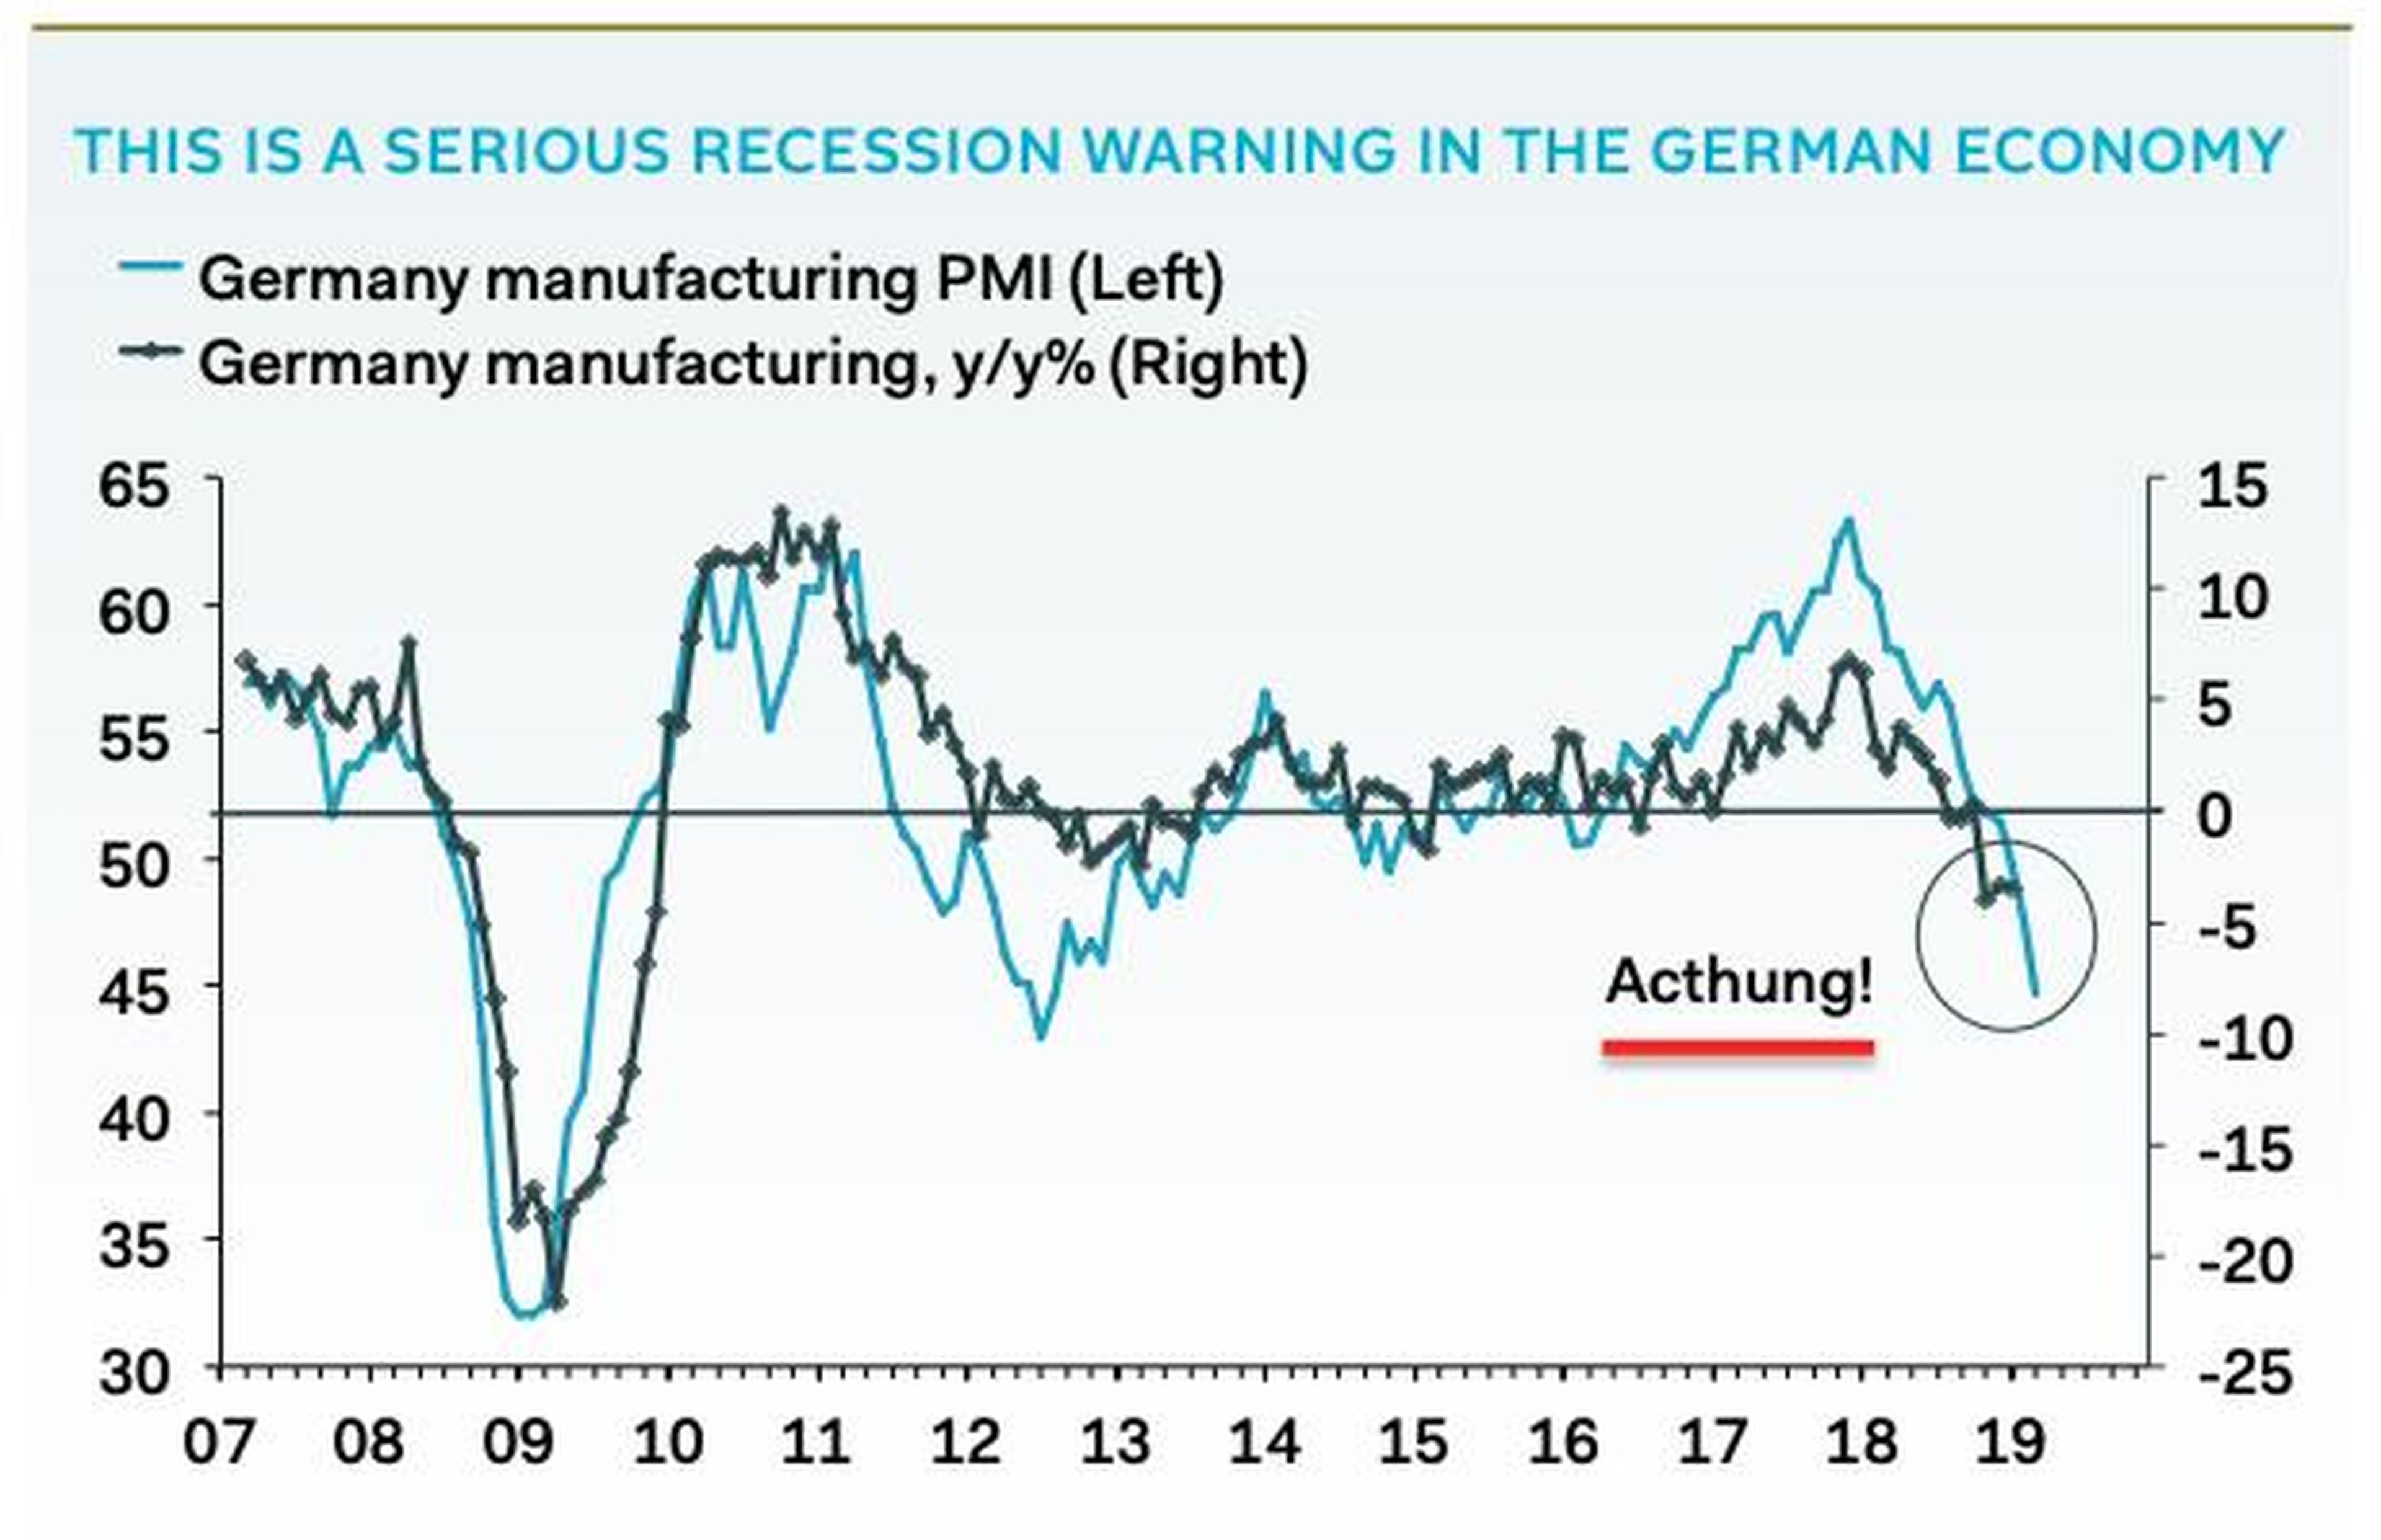 'This is a serious recession warning in the German economy'